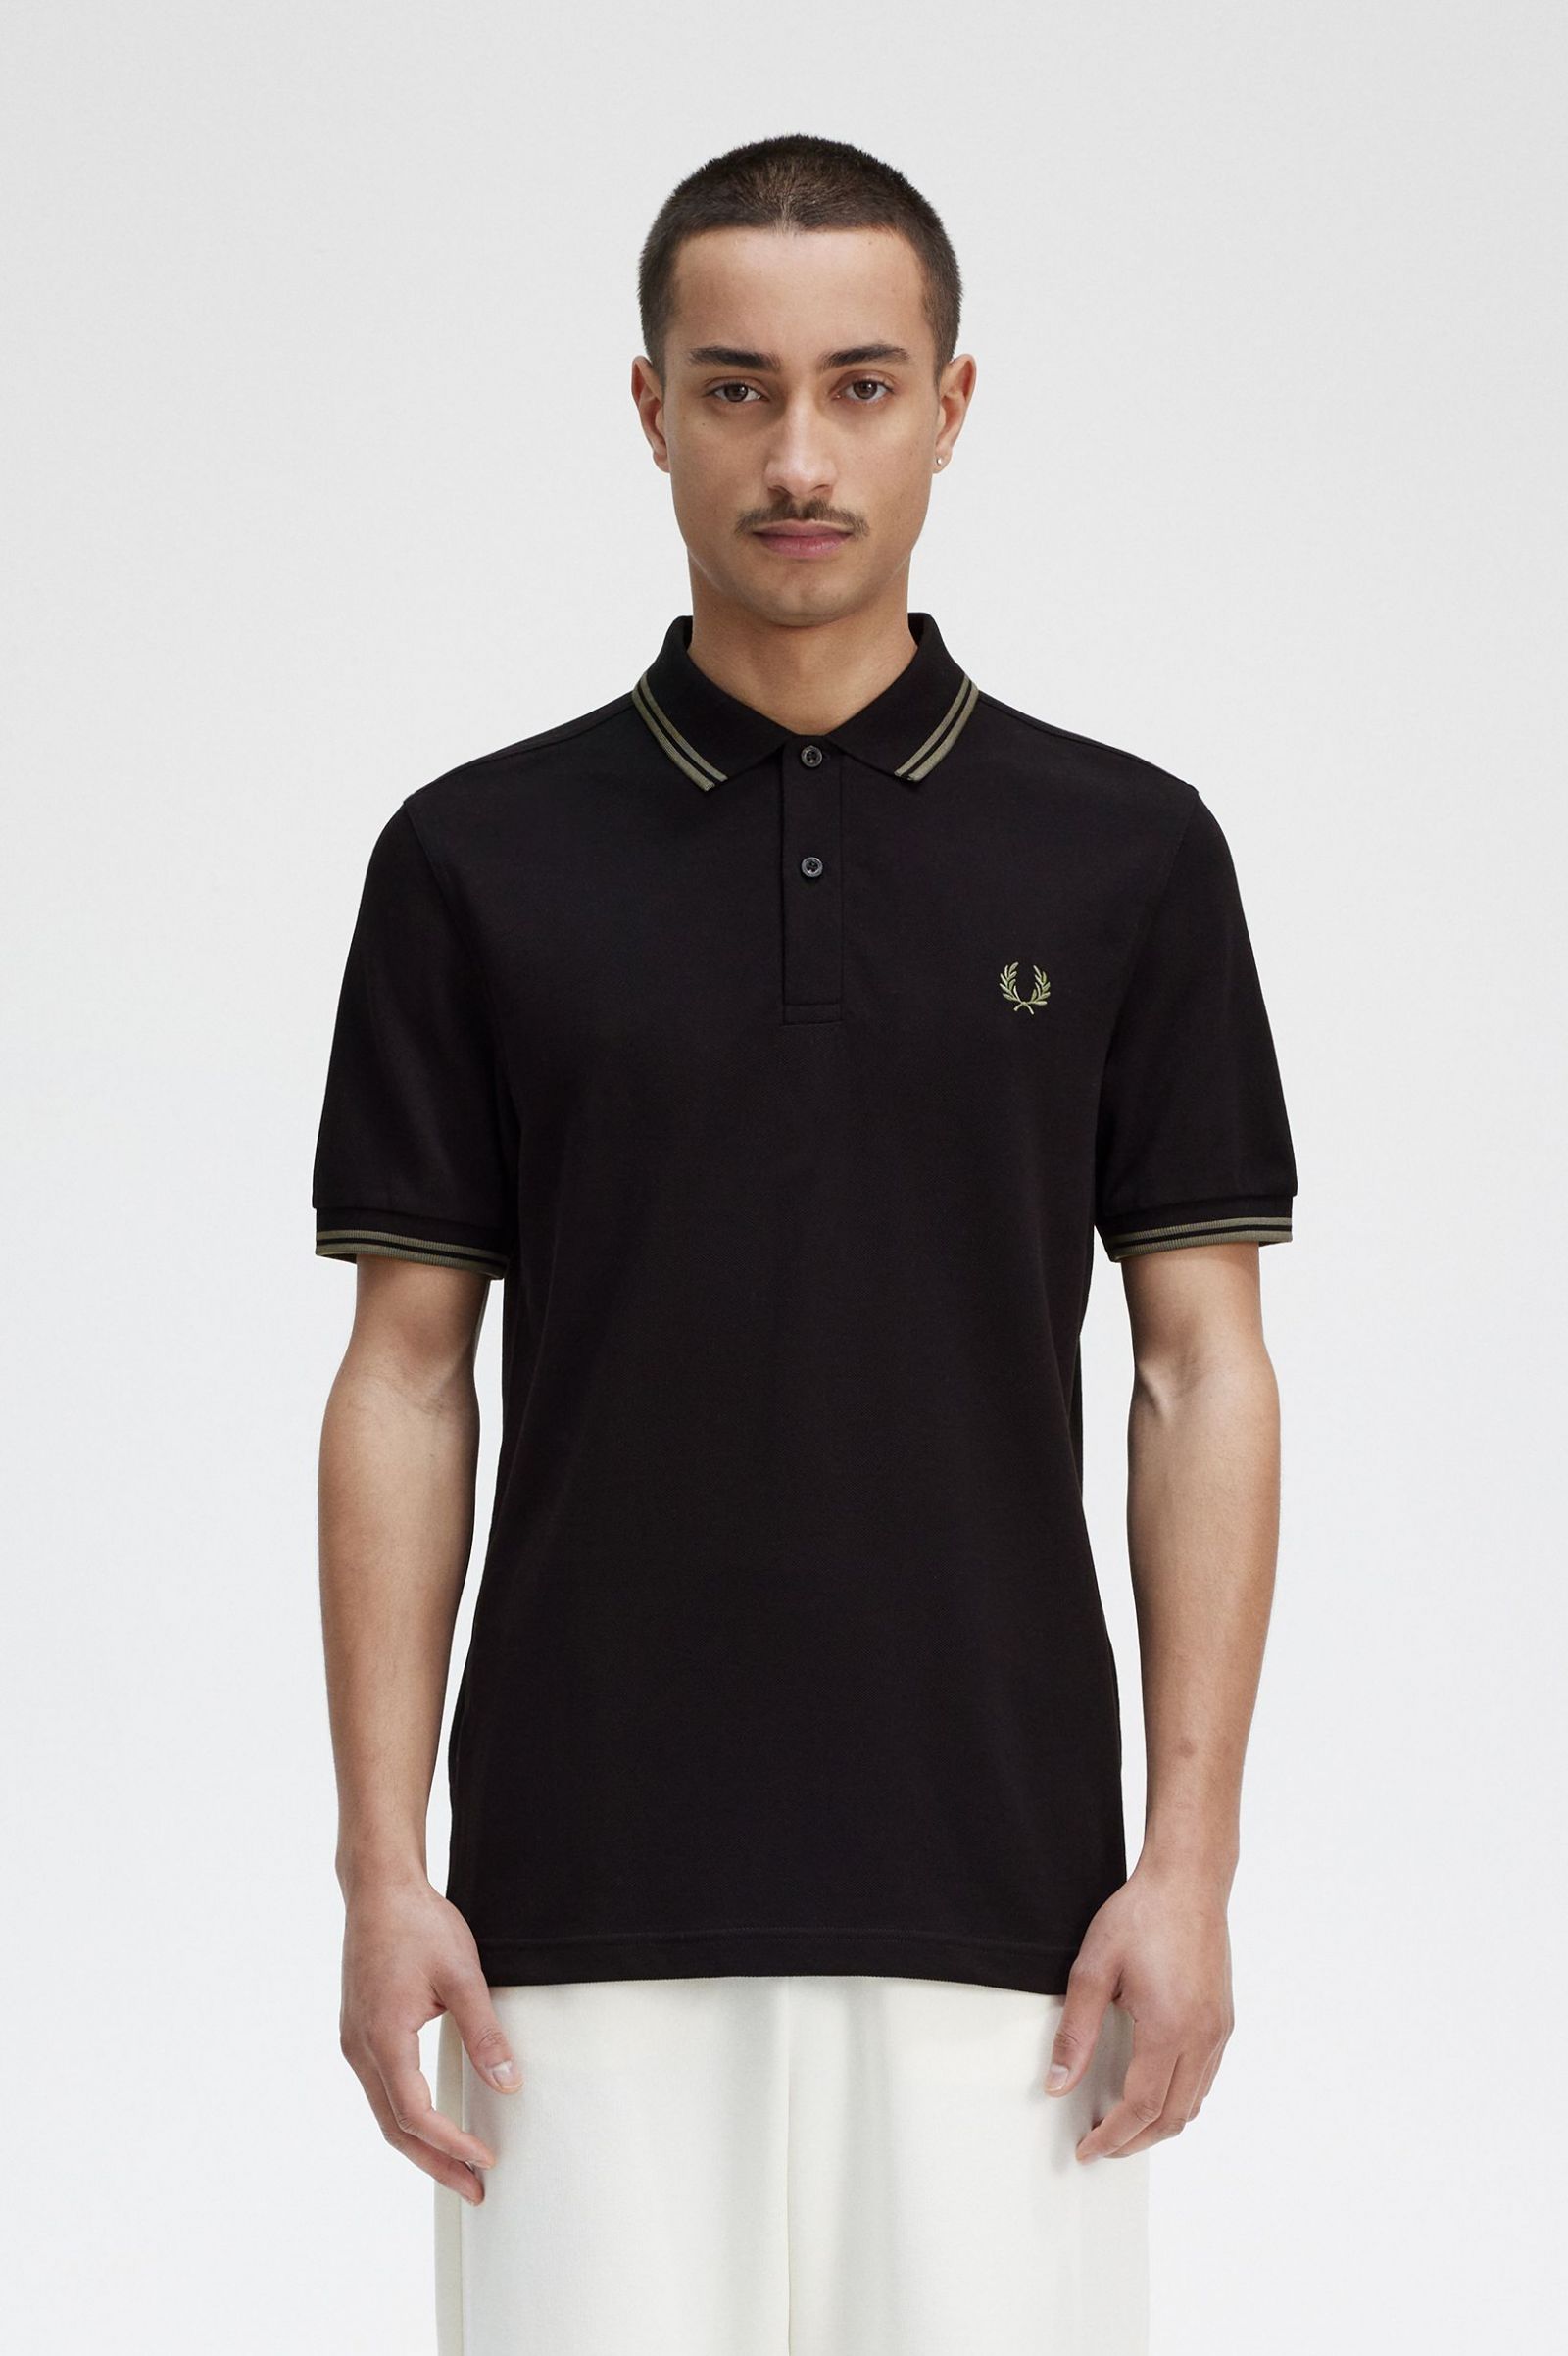 3D Graphic Fred Perry Shirt - Black | Men's Polo Shirts | Short & Long ...